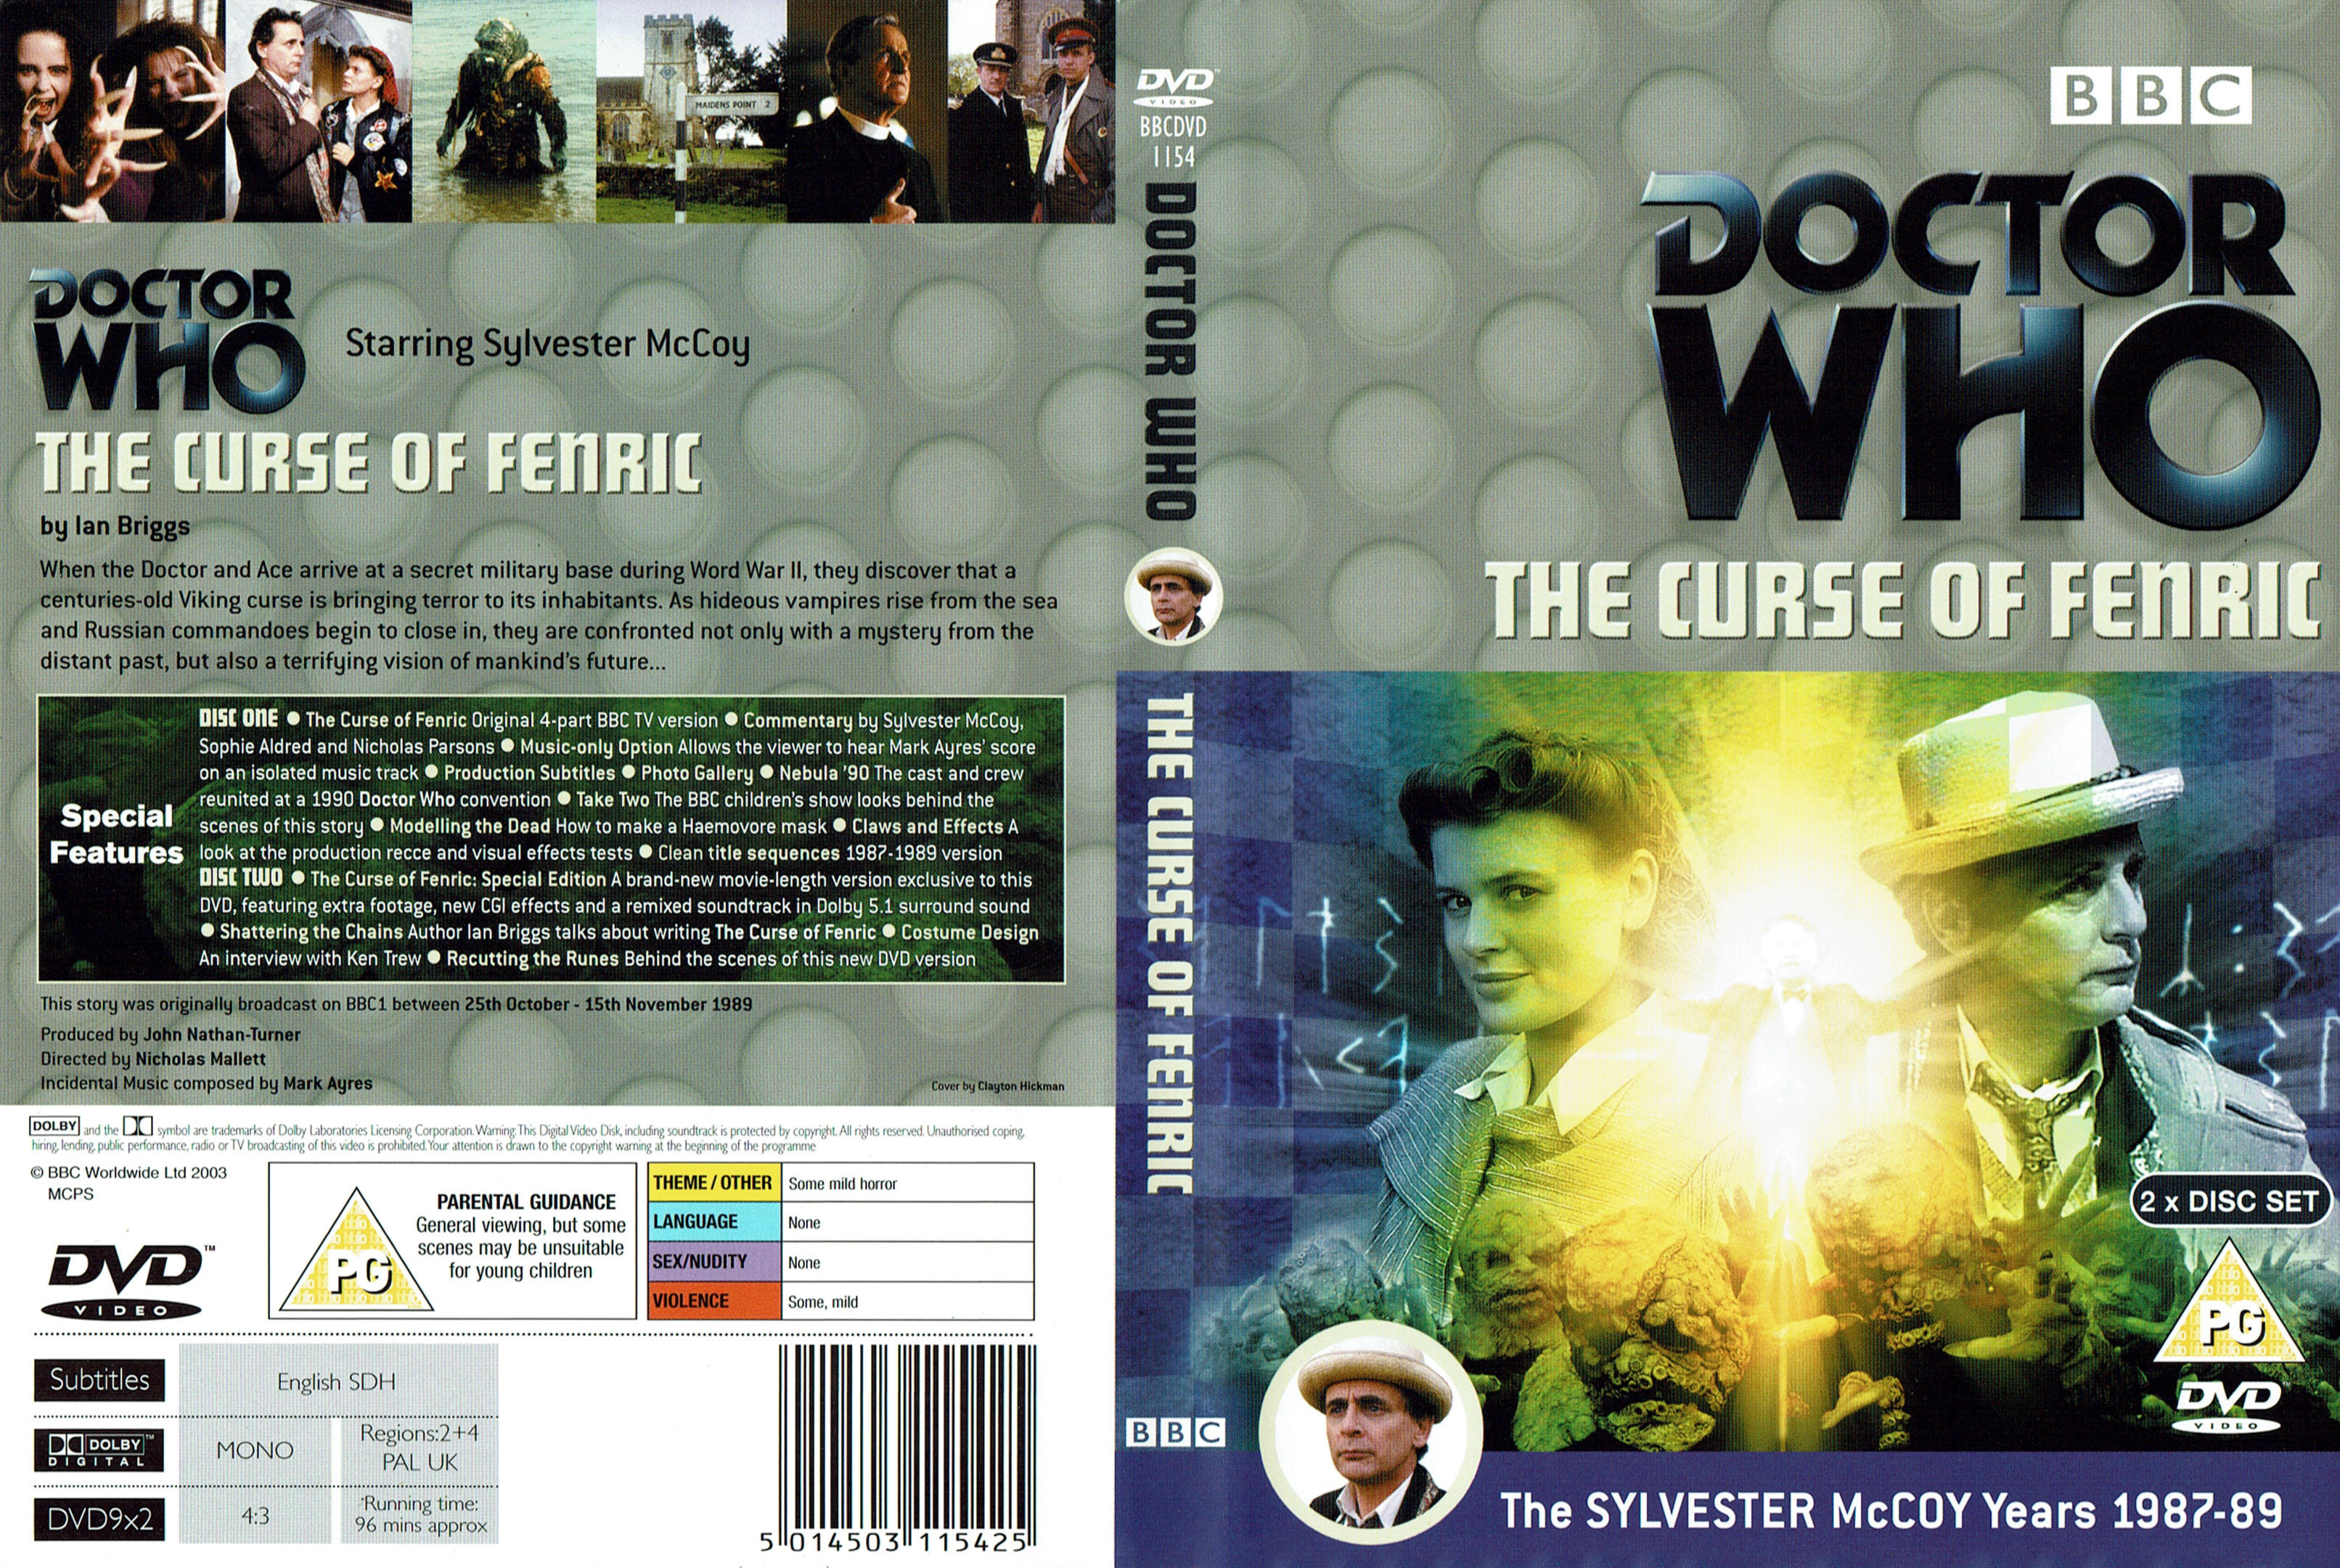 The Curse of Fenric DVD